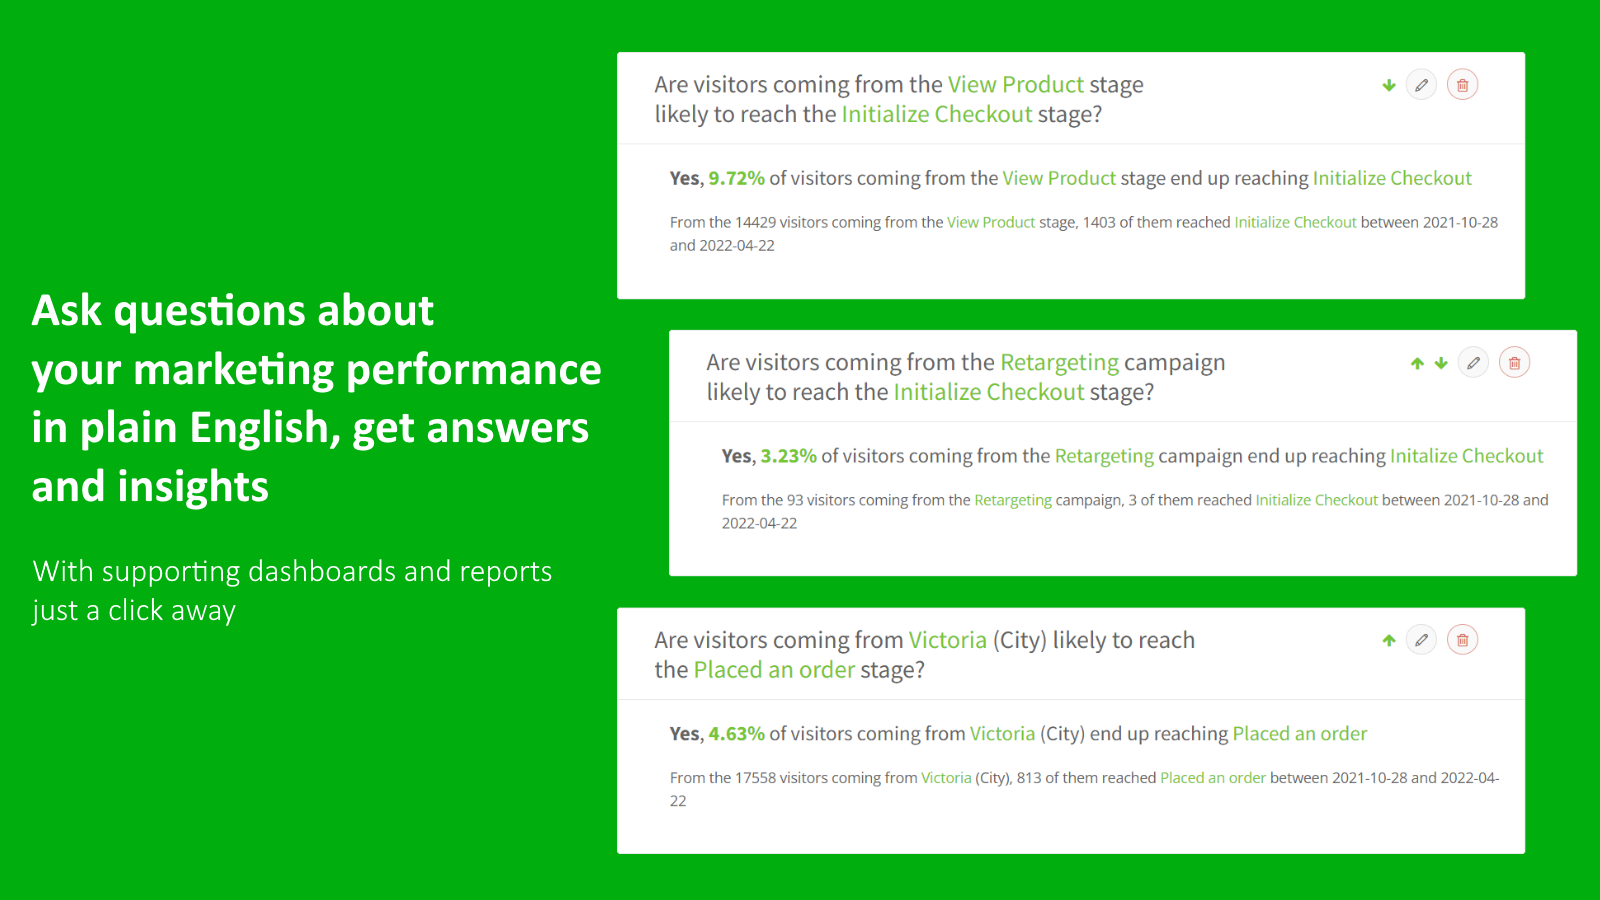 Ask marketing questions in plain English, get answers & insights